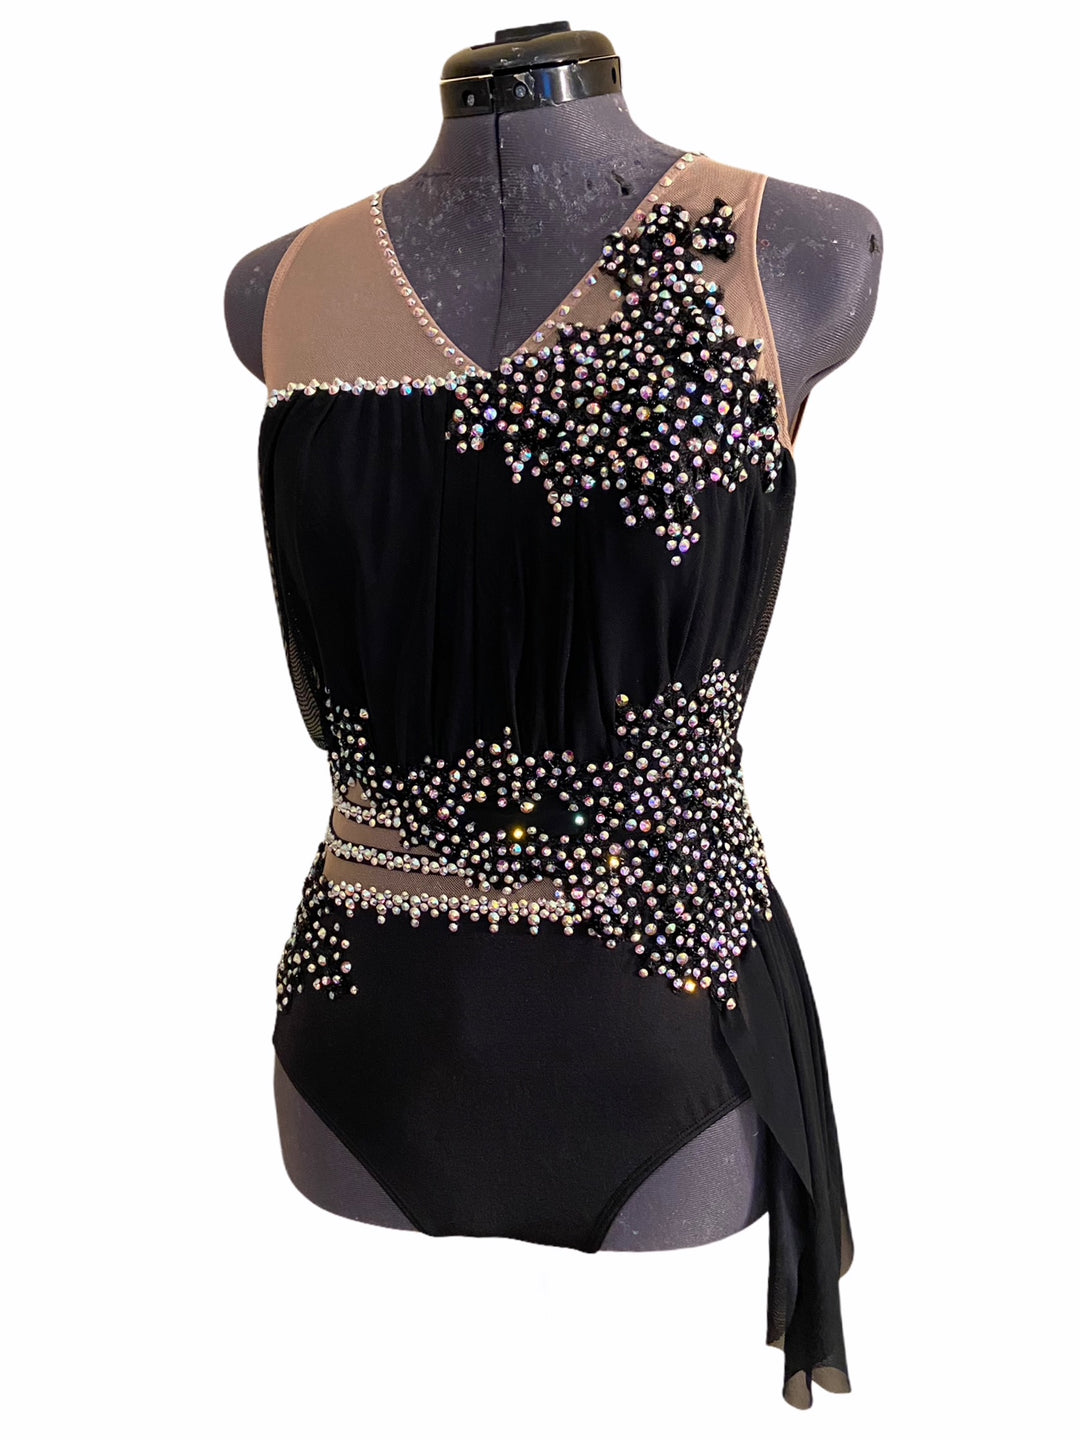 NEW Adult Small ready-to-ship lyrical or contemporary costume